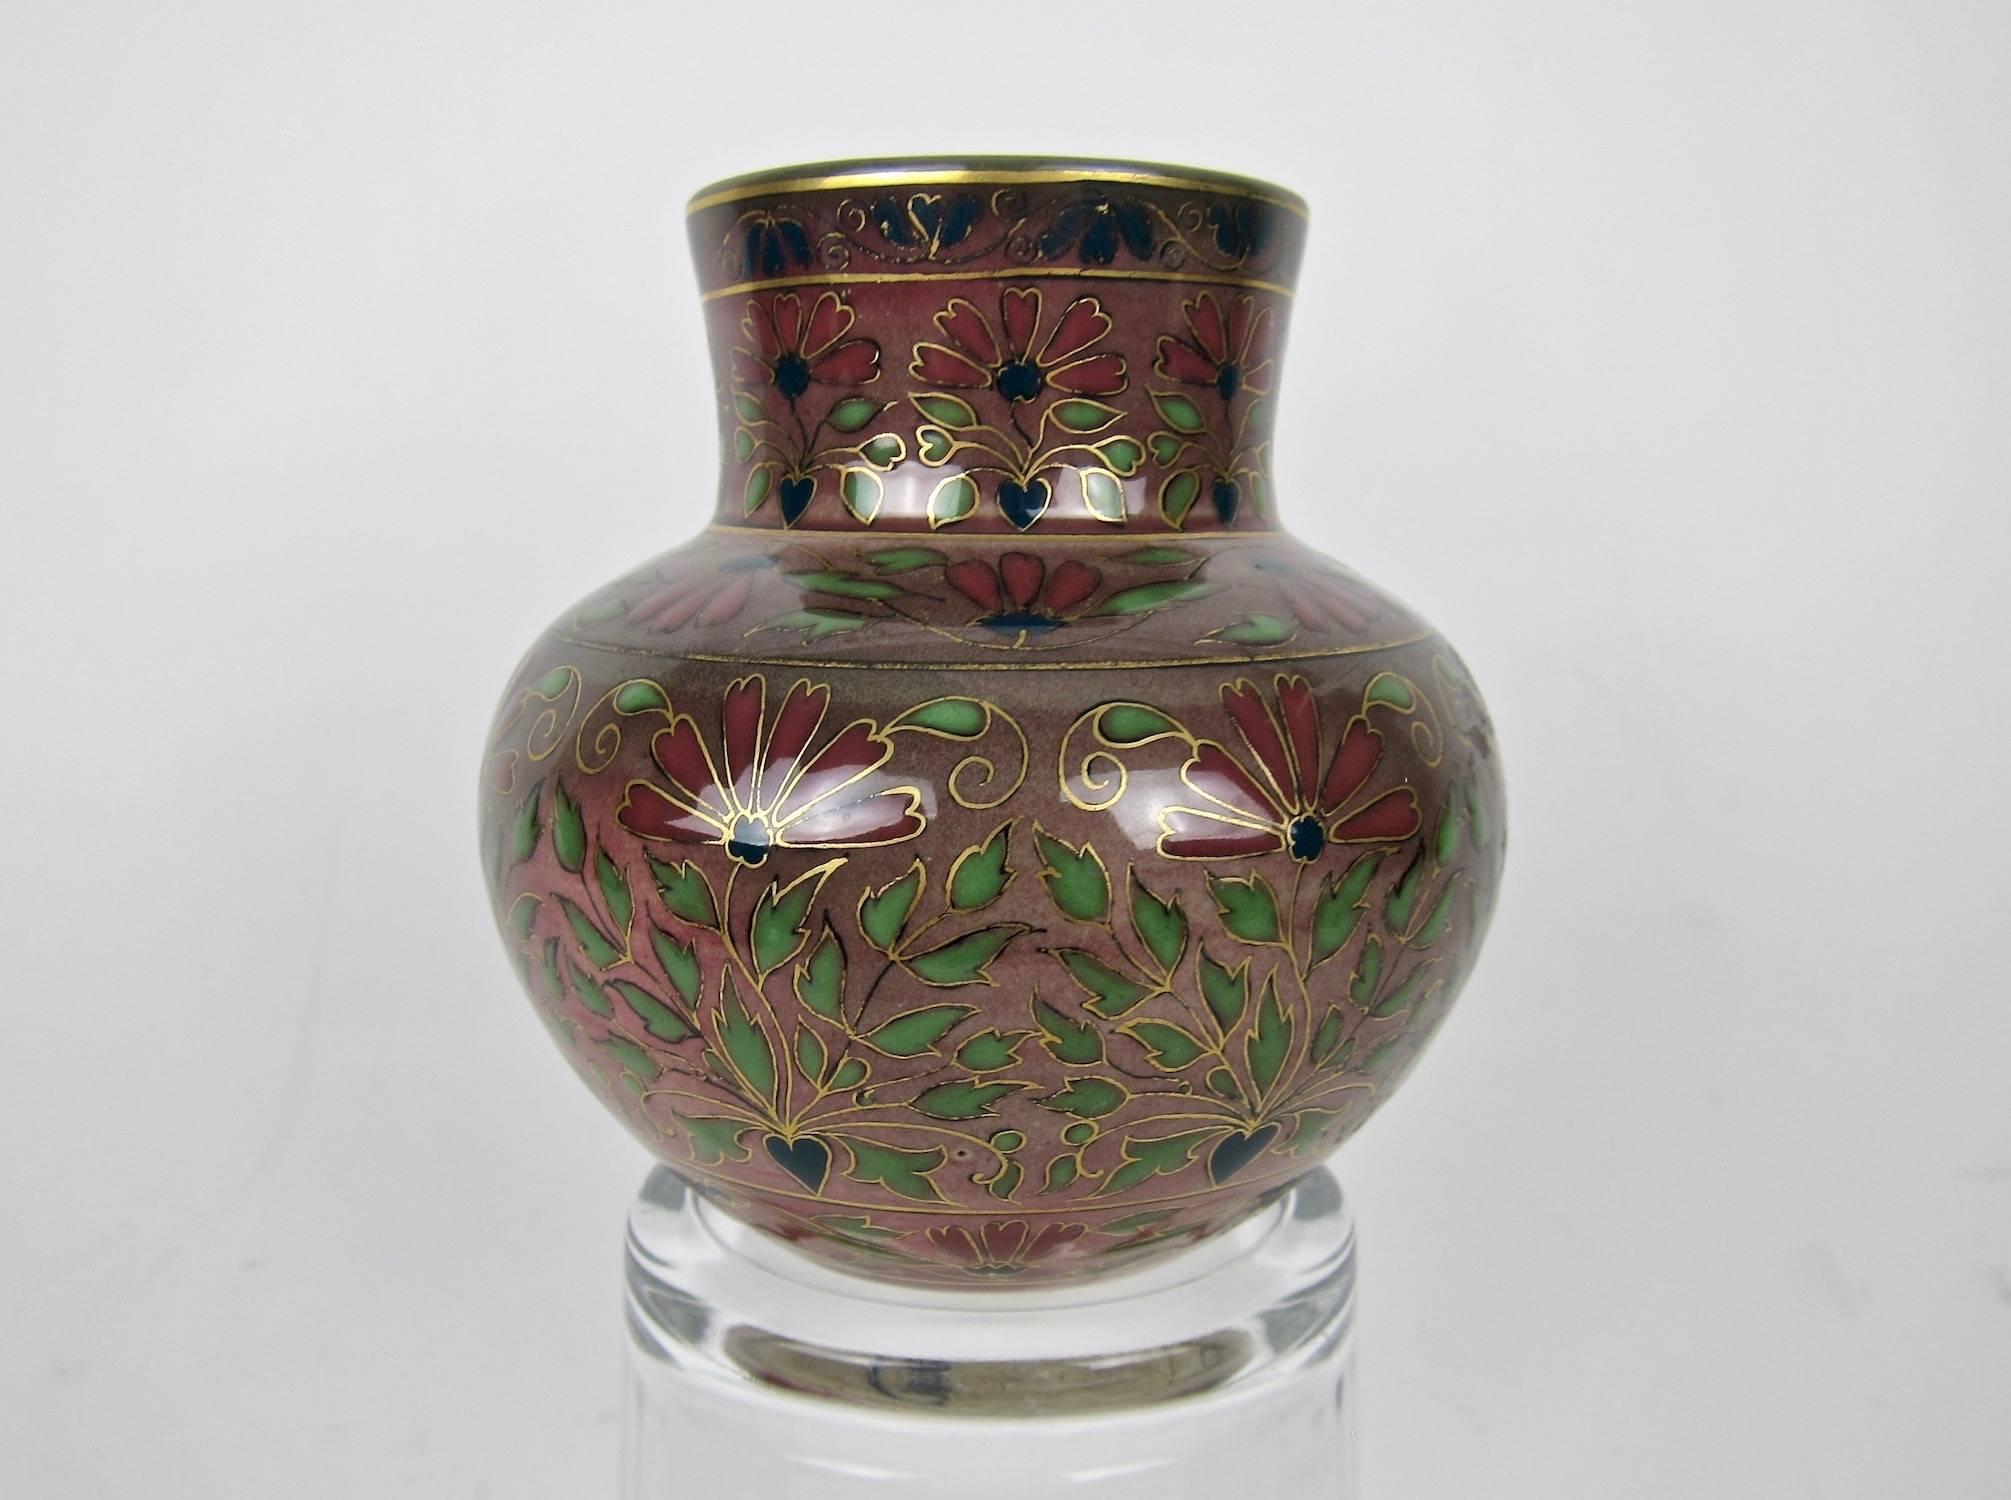 19th Century Victorian Zsolnay Pecs Porcelain Faience Vase in Jewel Toned Cloisonne-Style